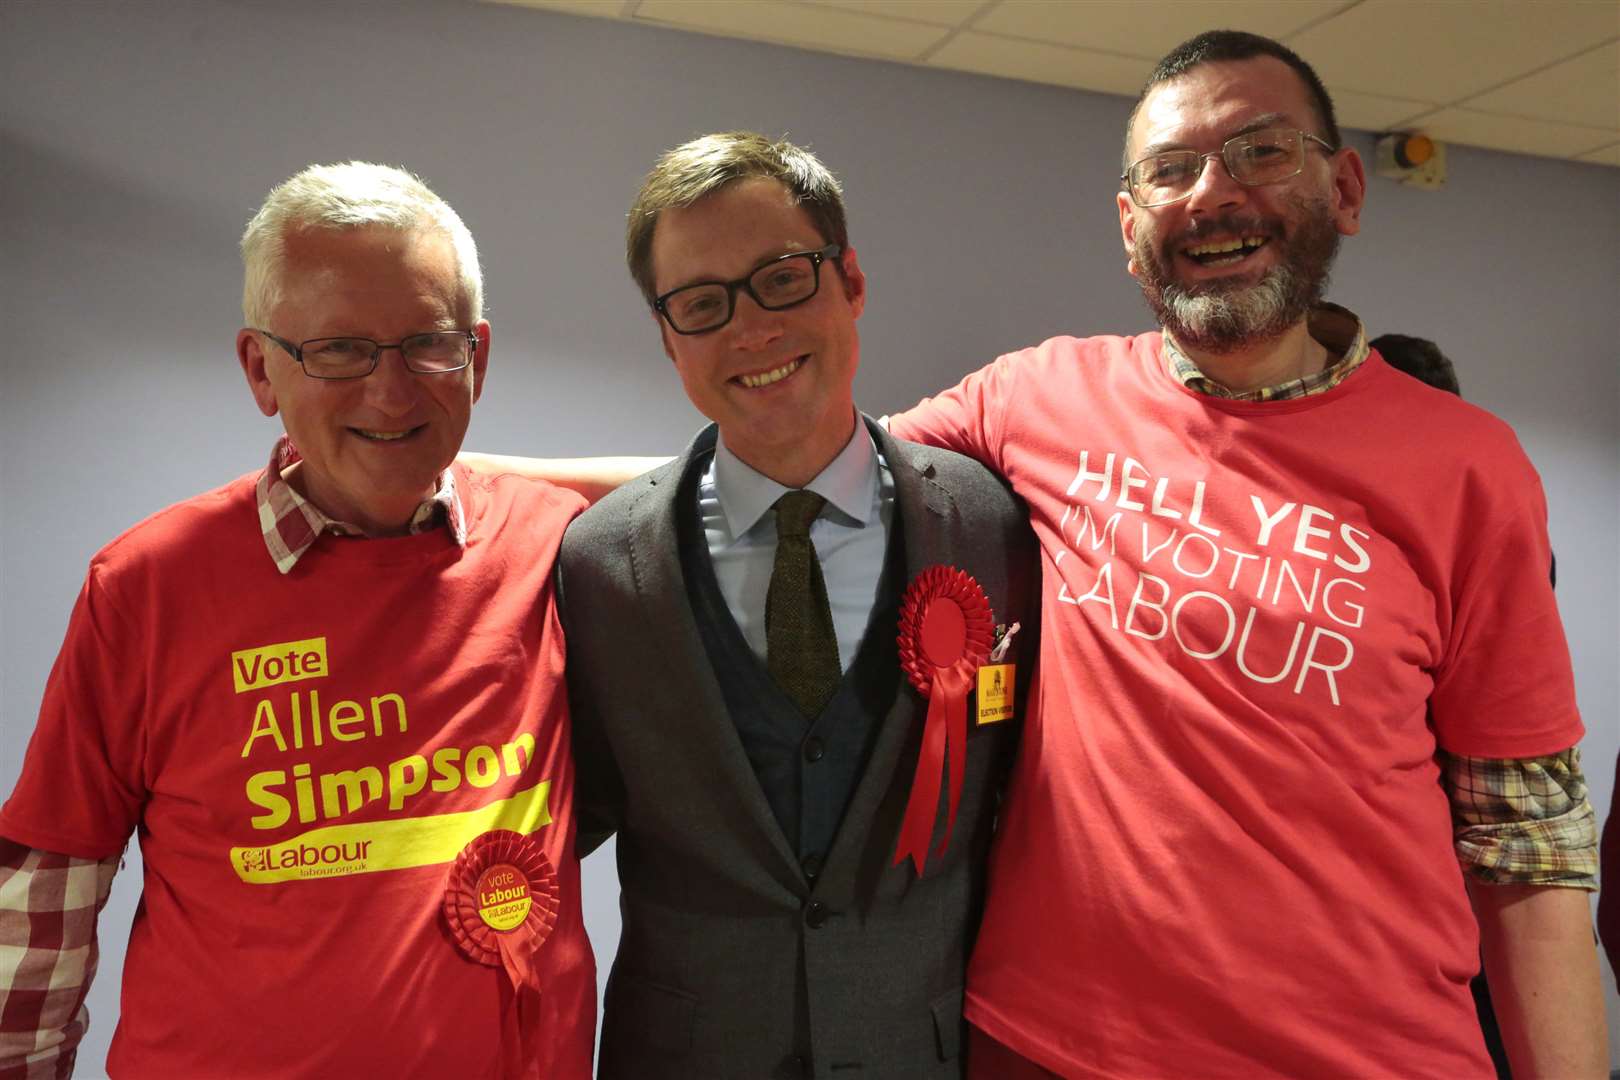 Allen Simpson (Labour) staying cheerful with supporters